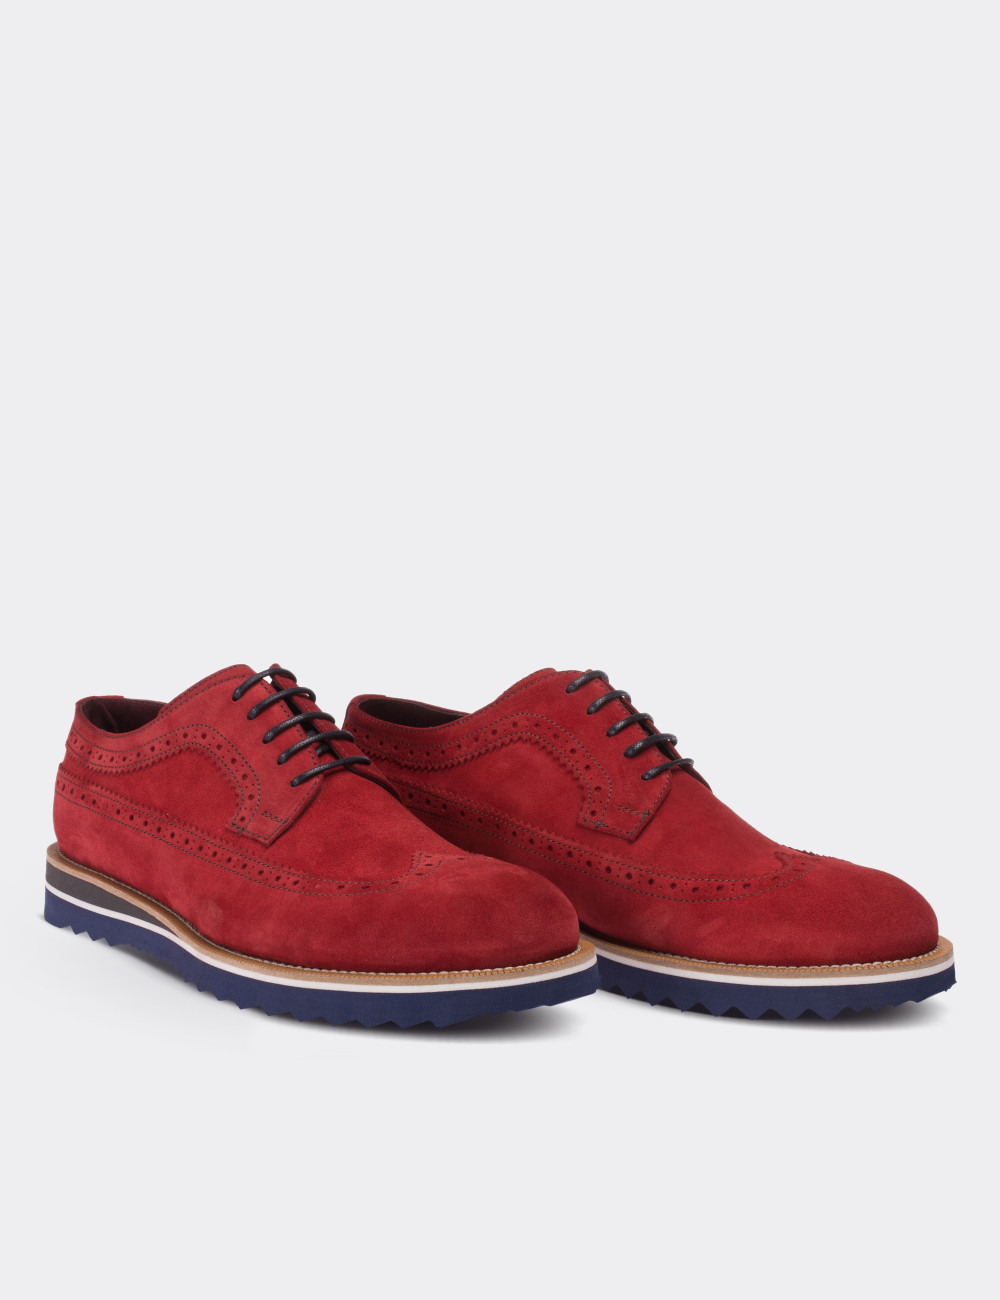 Red Suede Leather Lace-up Shoes - Deery